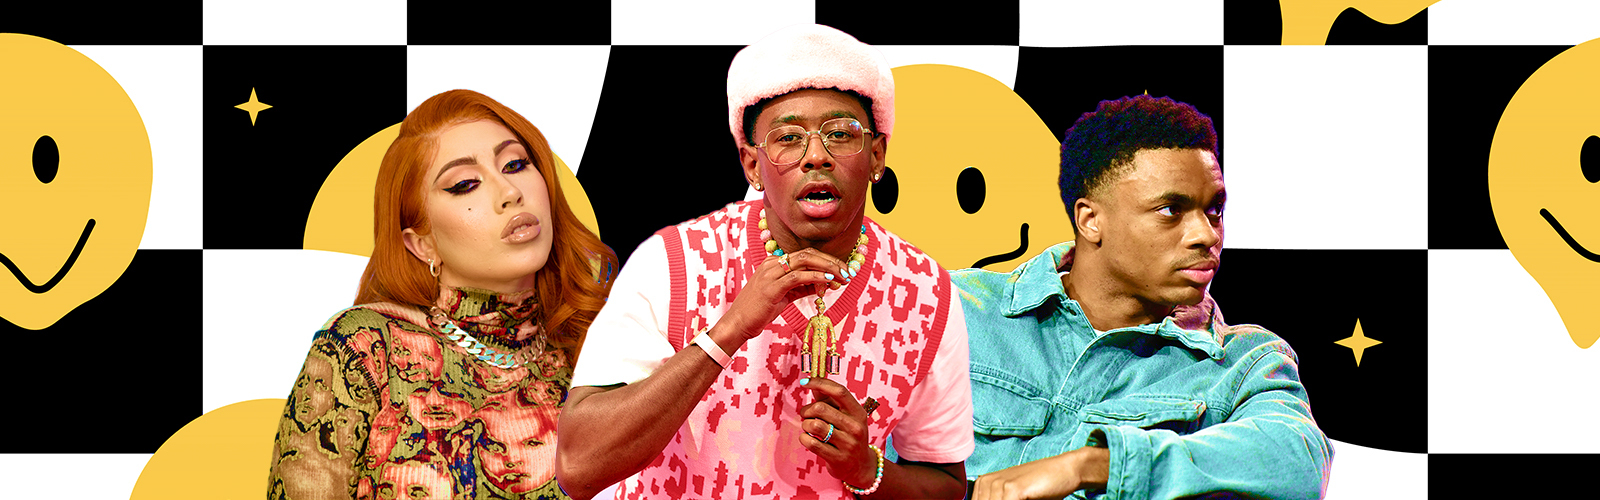 Tyler, the Creator Shows Off Another Legendary Watch in His Collection